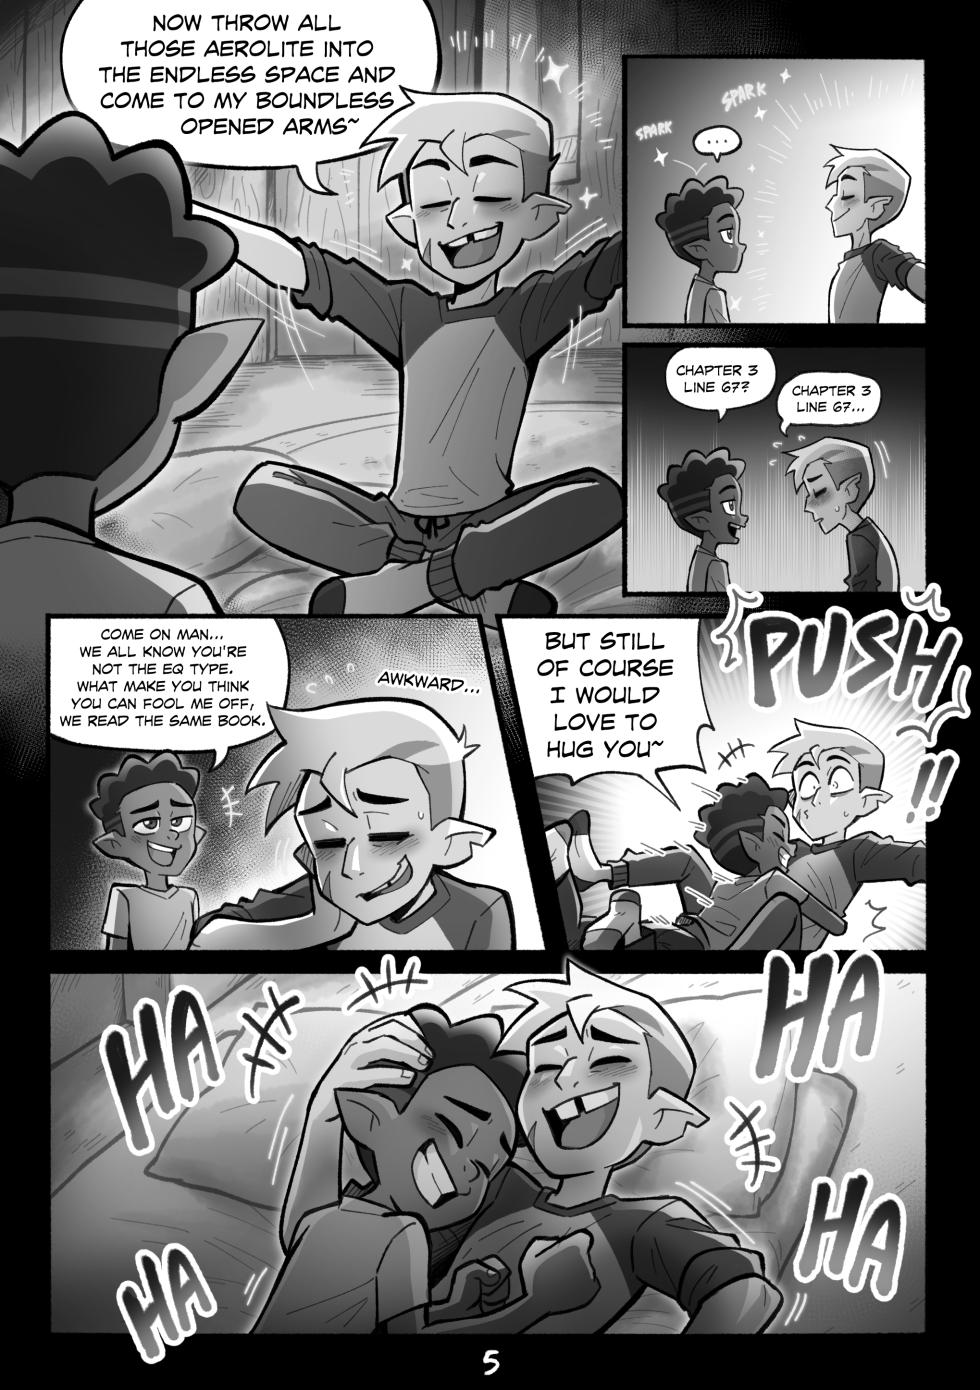 [Kimchi] "Guster" Sleepover - The Owl House - Page 6